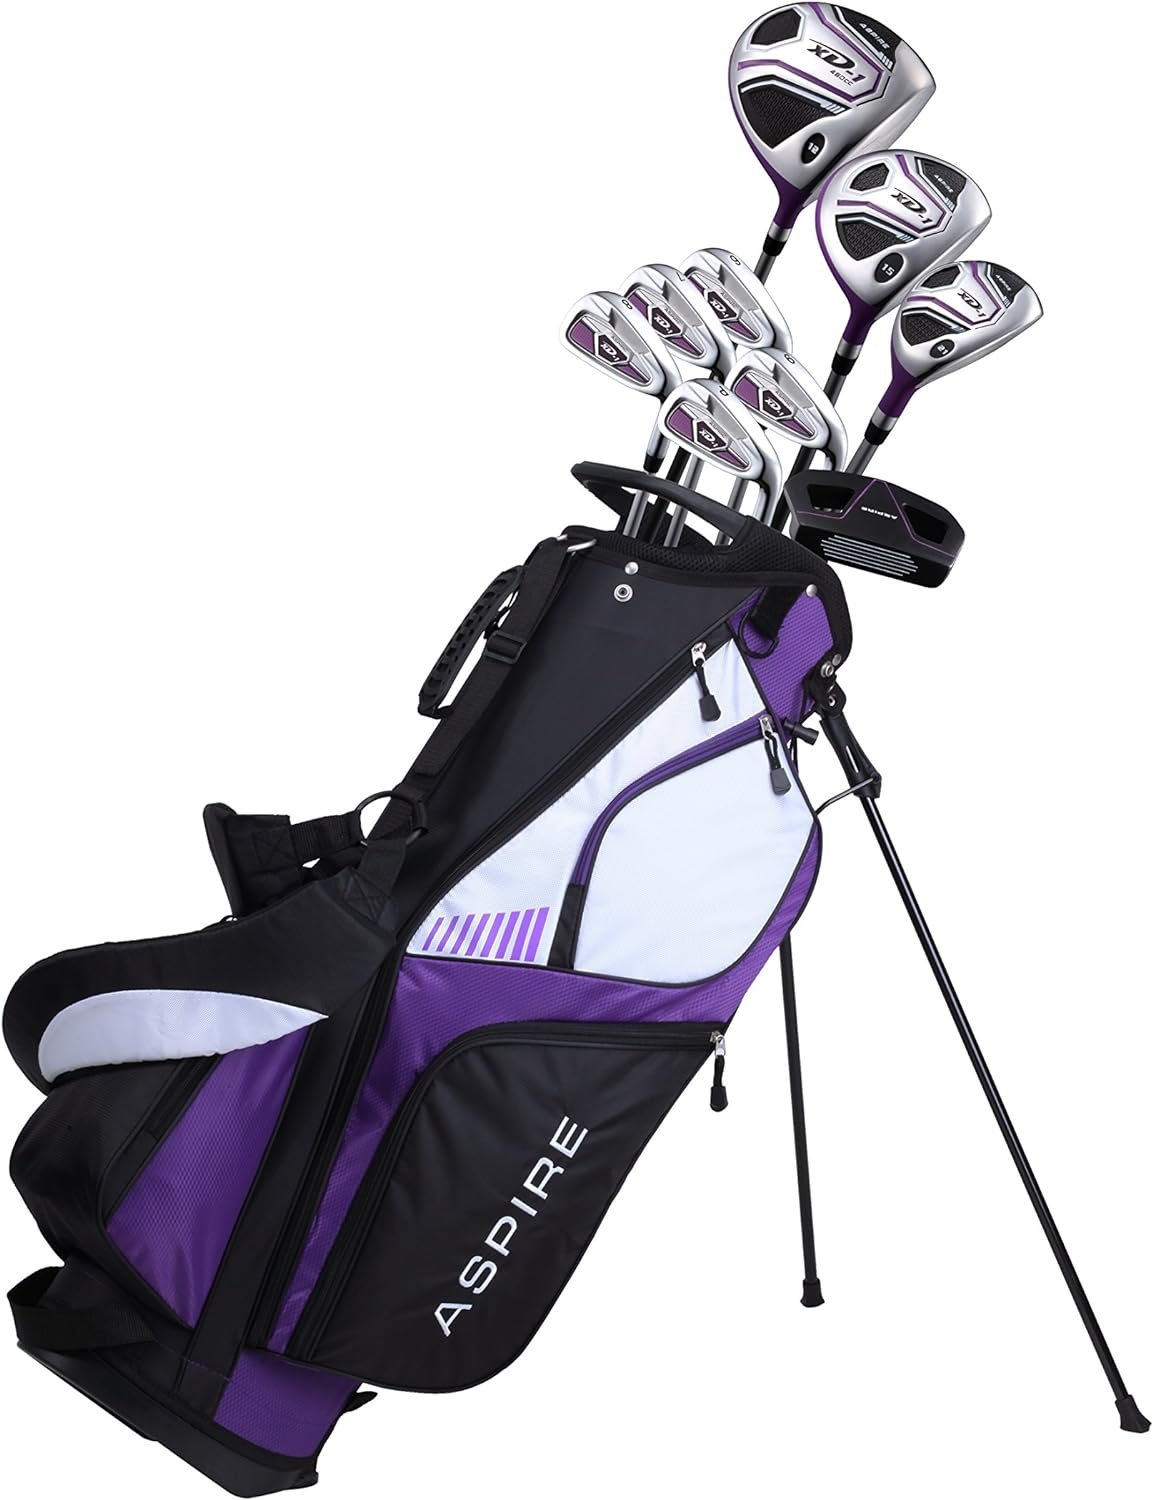 Aspire XD1 Ladies Womens Complete Golf Clubs Set Includes Driver, Fairway, Hybrid, 6-PW Irons, Putter, Stand Bag, 3 H/Cs Purple